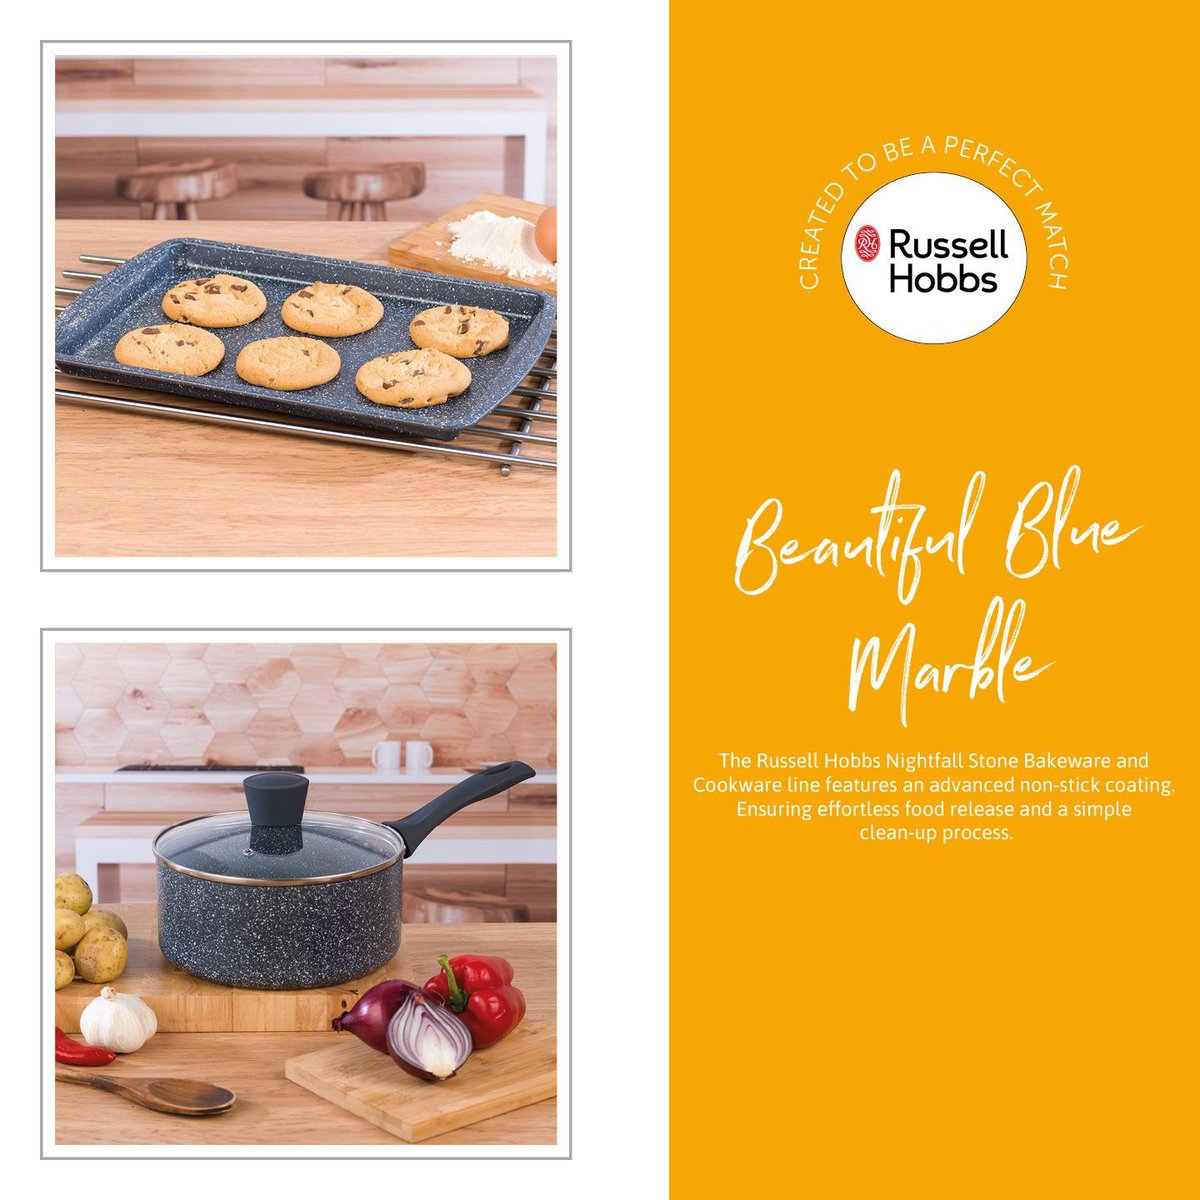 Make a statement with the matching Nightfall Stone Cookware and Bakeware🤩 ⭐